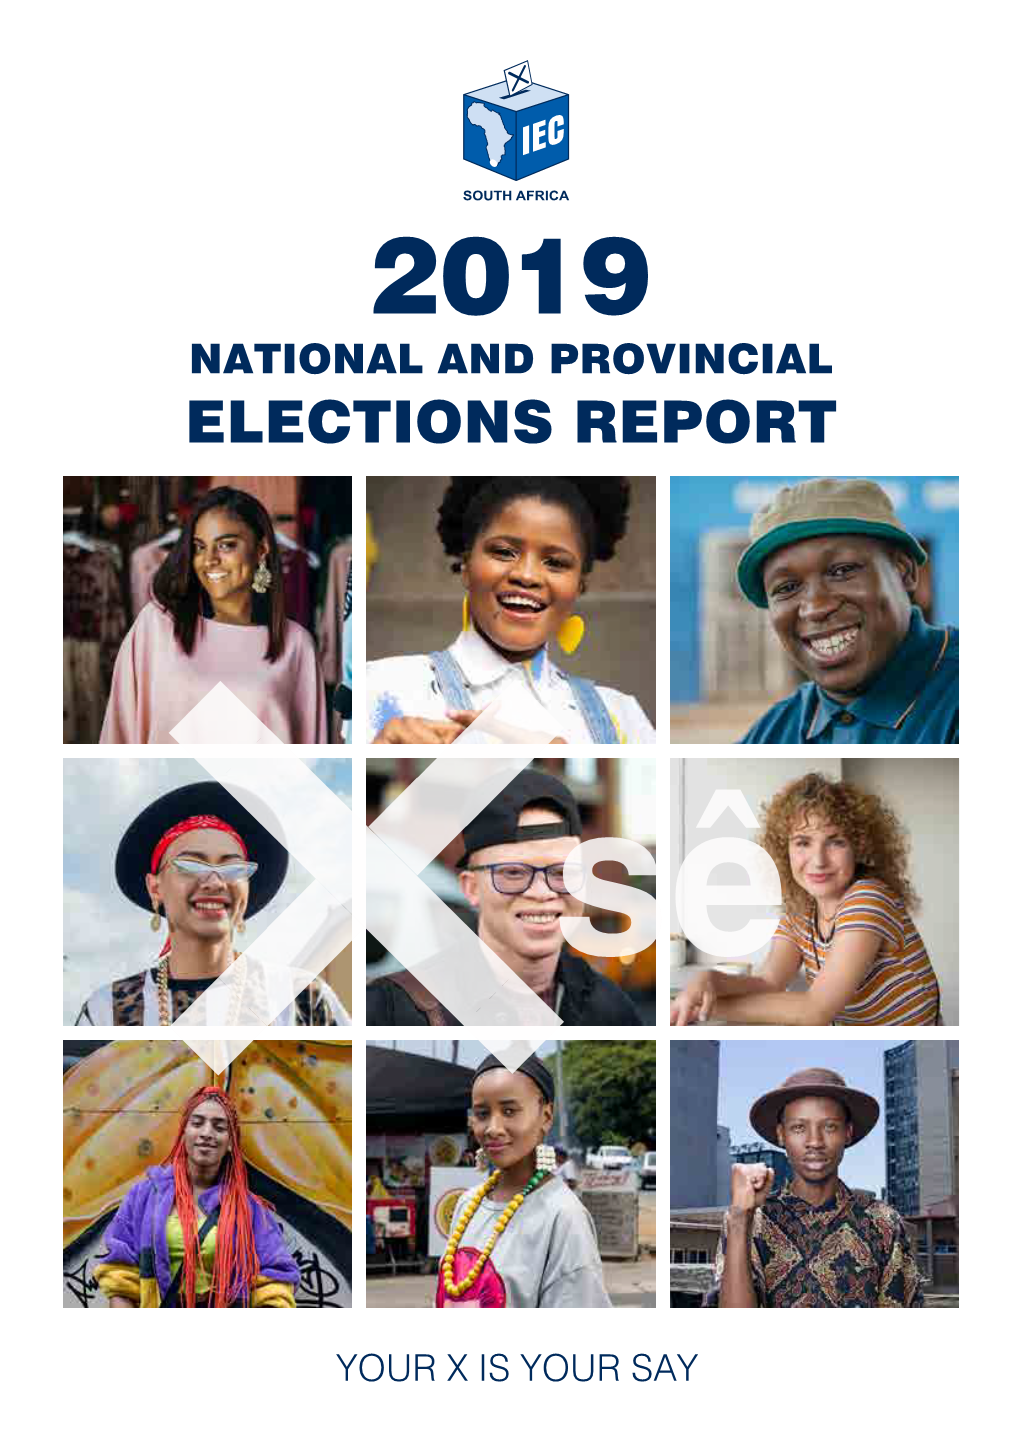 2019 National and Provincial Elections Report of South Africa's Electoral Commission